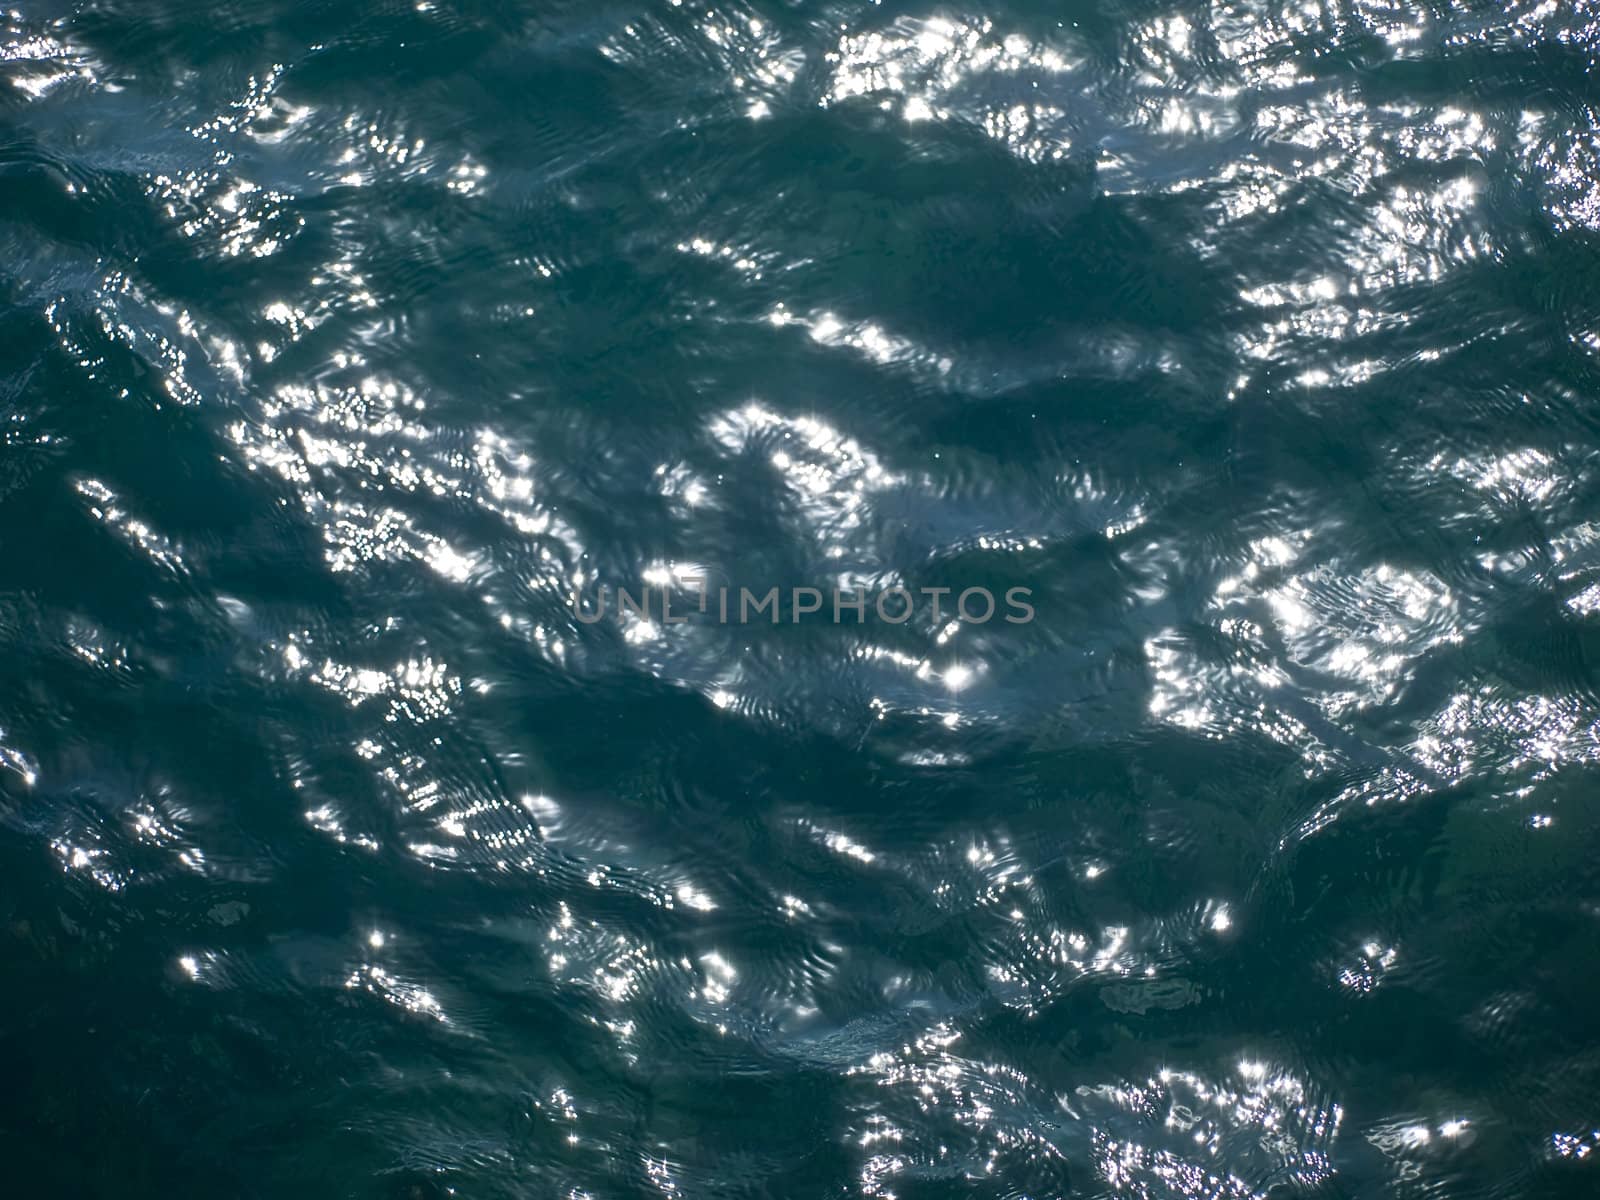 Ocean water with light wave ripples, ideal for backdrops or as a texture image